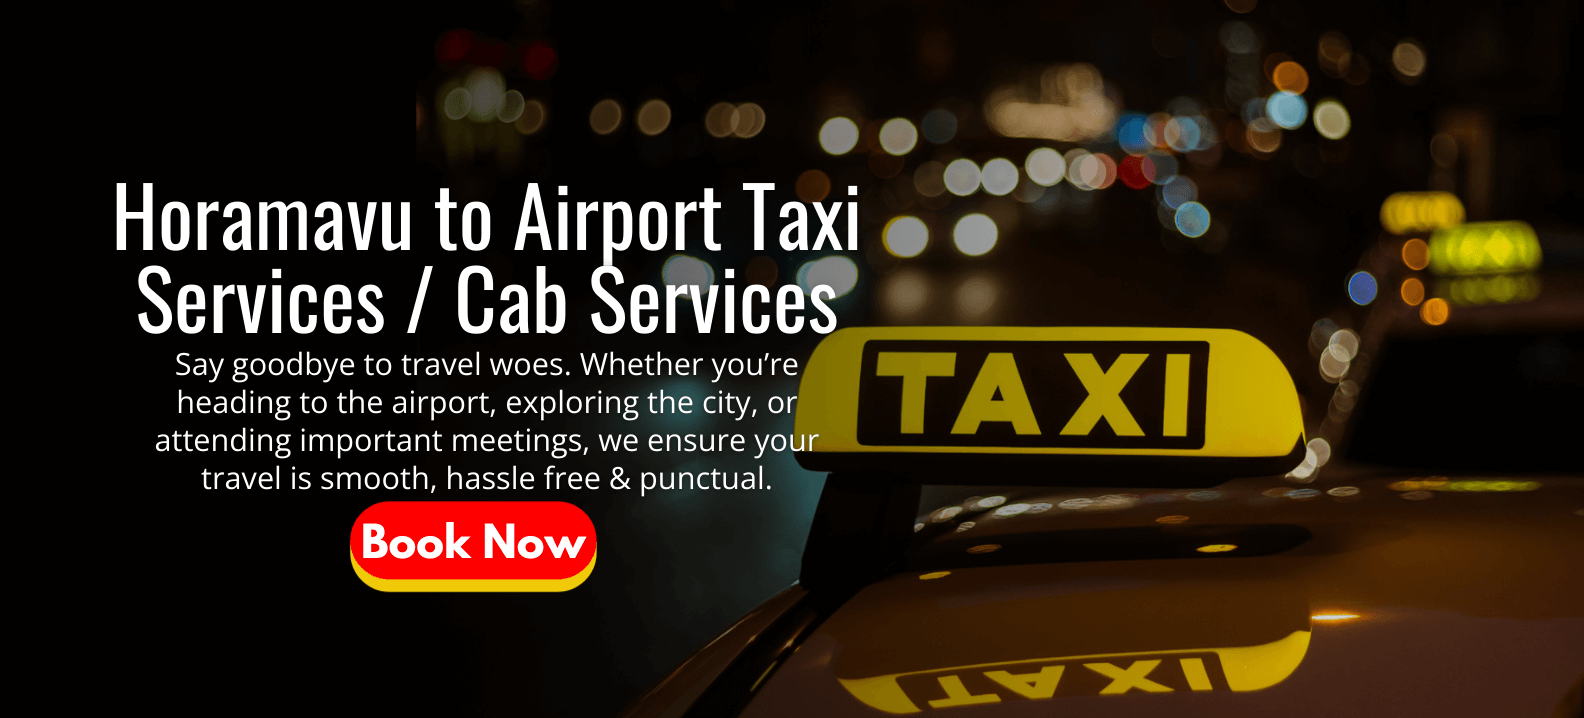 Horamavu to Airport Taxi Services _ Cab Services